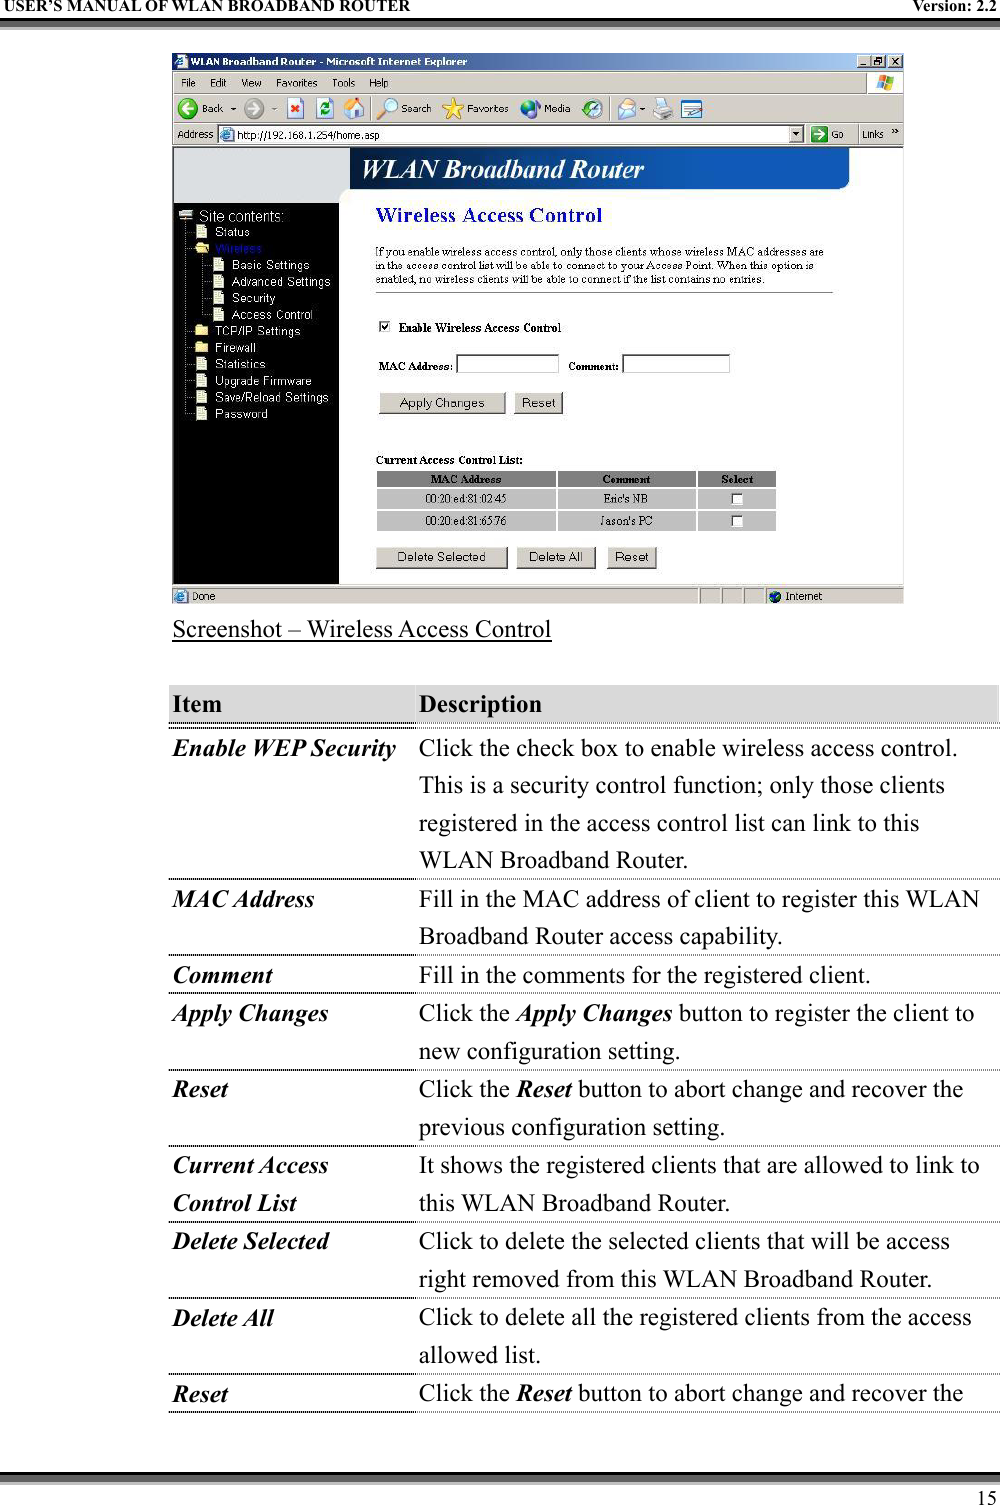   USER’S MANUAL OF WLAN BROADBAND ROUTER    Version: 2.2     15  Screenshot – Wireless Access Control  Item  Description   Enable WEP Security Click the check box to enable wireless access control. This is a security control function; only those clients registered in the access control list can link to this WLAN Broadband Router.   MAC Address Fill in the MAC address of client to register this WLAN Broadband Router access capability. Comment Fill in the comments for the registered client. Apply Changes Click the Apply Changes button to register the client to new configuration setting. Reset  Click the Reset button to abort change and recover the previous configuration setting. Current Access Control List It shows the registered clients that are allowed to link to this WLAN Broadband Router. Delete Selected  Click to delete the selected clients that will be access right removed from this WLAN Broadband Router. Delete All  Click to delete all the registered clients from the access allowed list.   Reset  Click the Reset button to abort change and recover the 